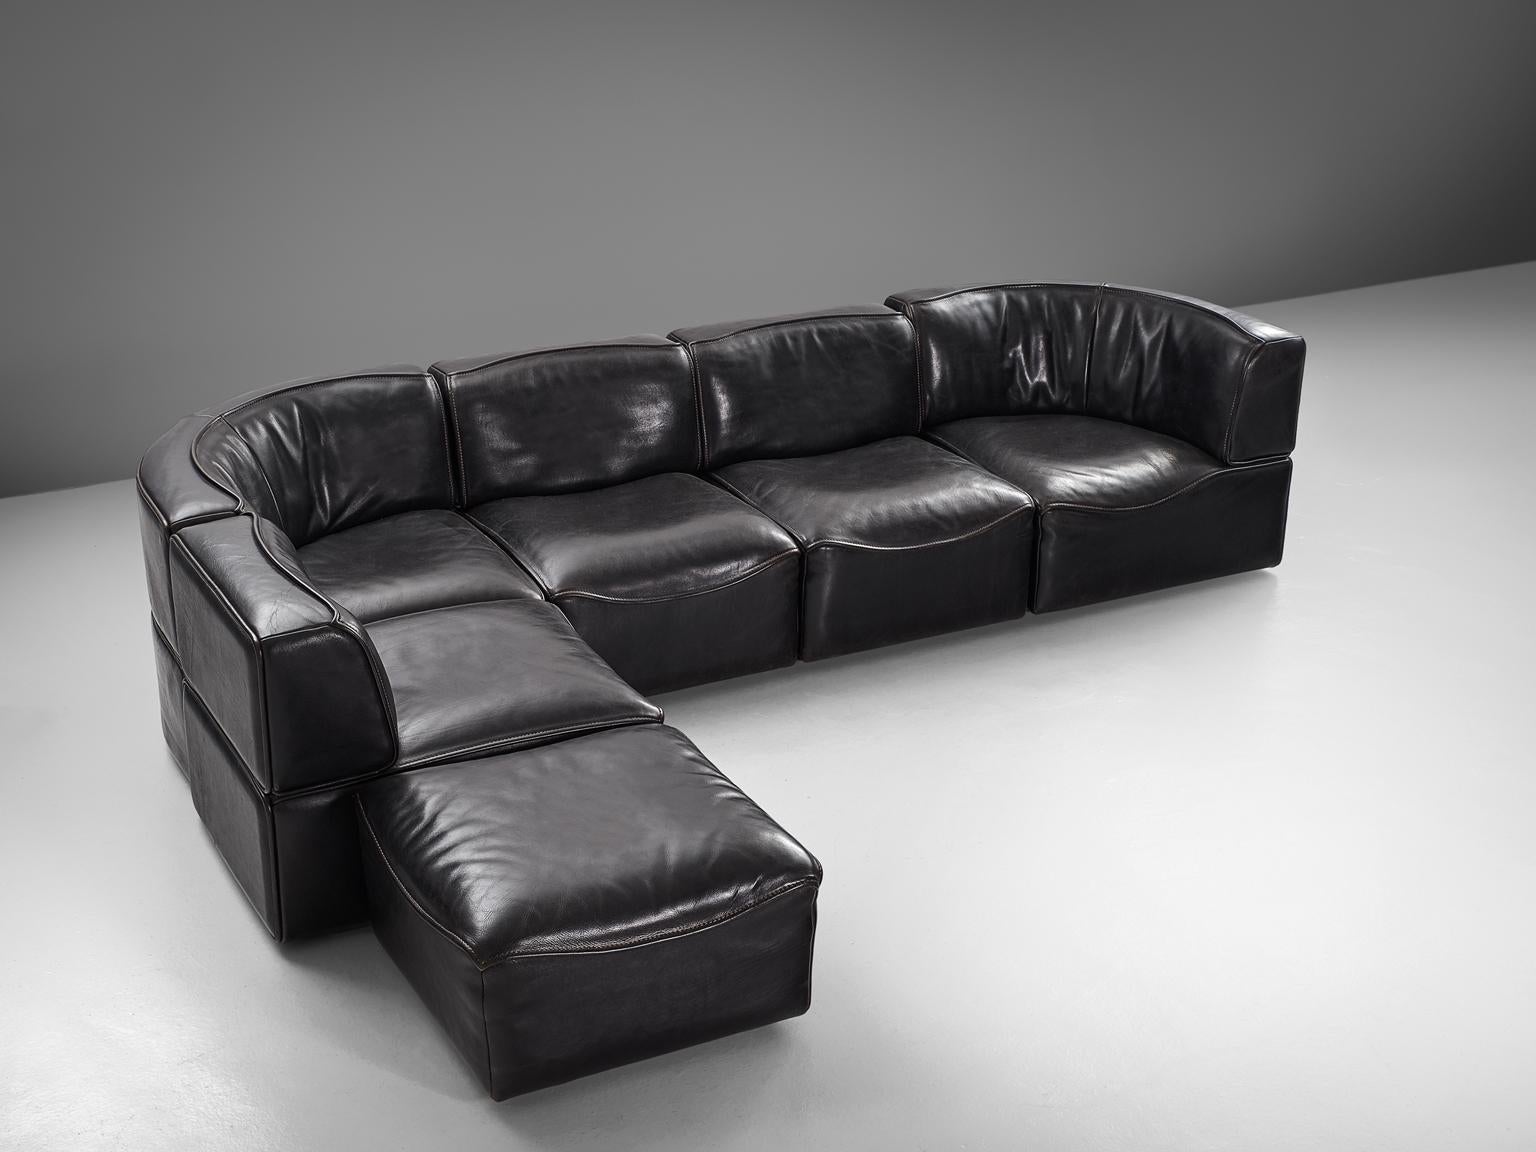 Sectional sofa model DS-15, black leather by De Sede, Switzerland, 1970s. 

This high quality sectional sofa contains two corner elements, three normal elements and one ottoman, which makes it possible to arrange this sofa to your own wishes. The